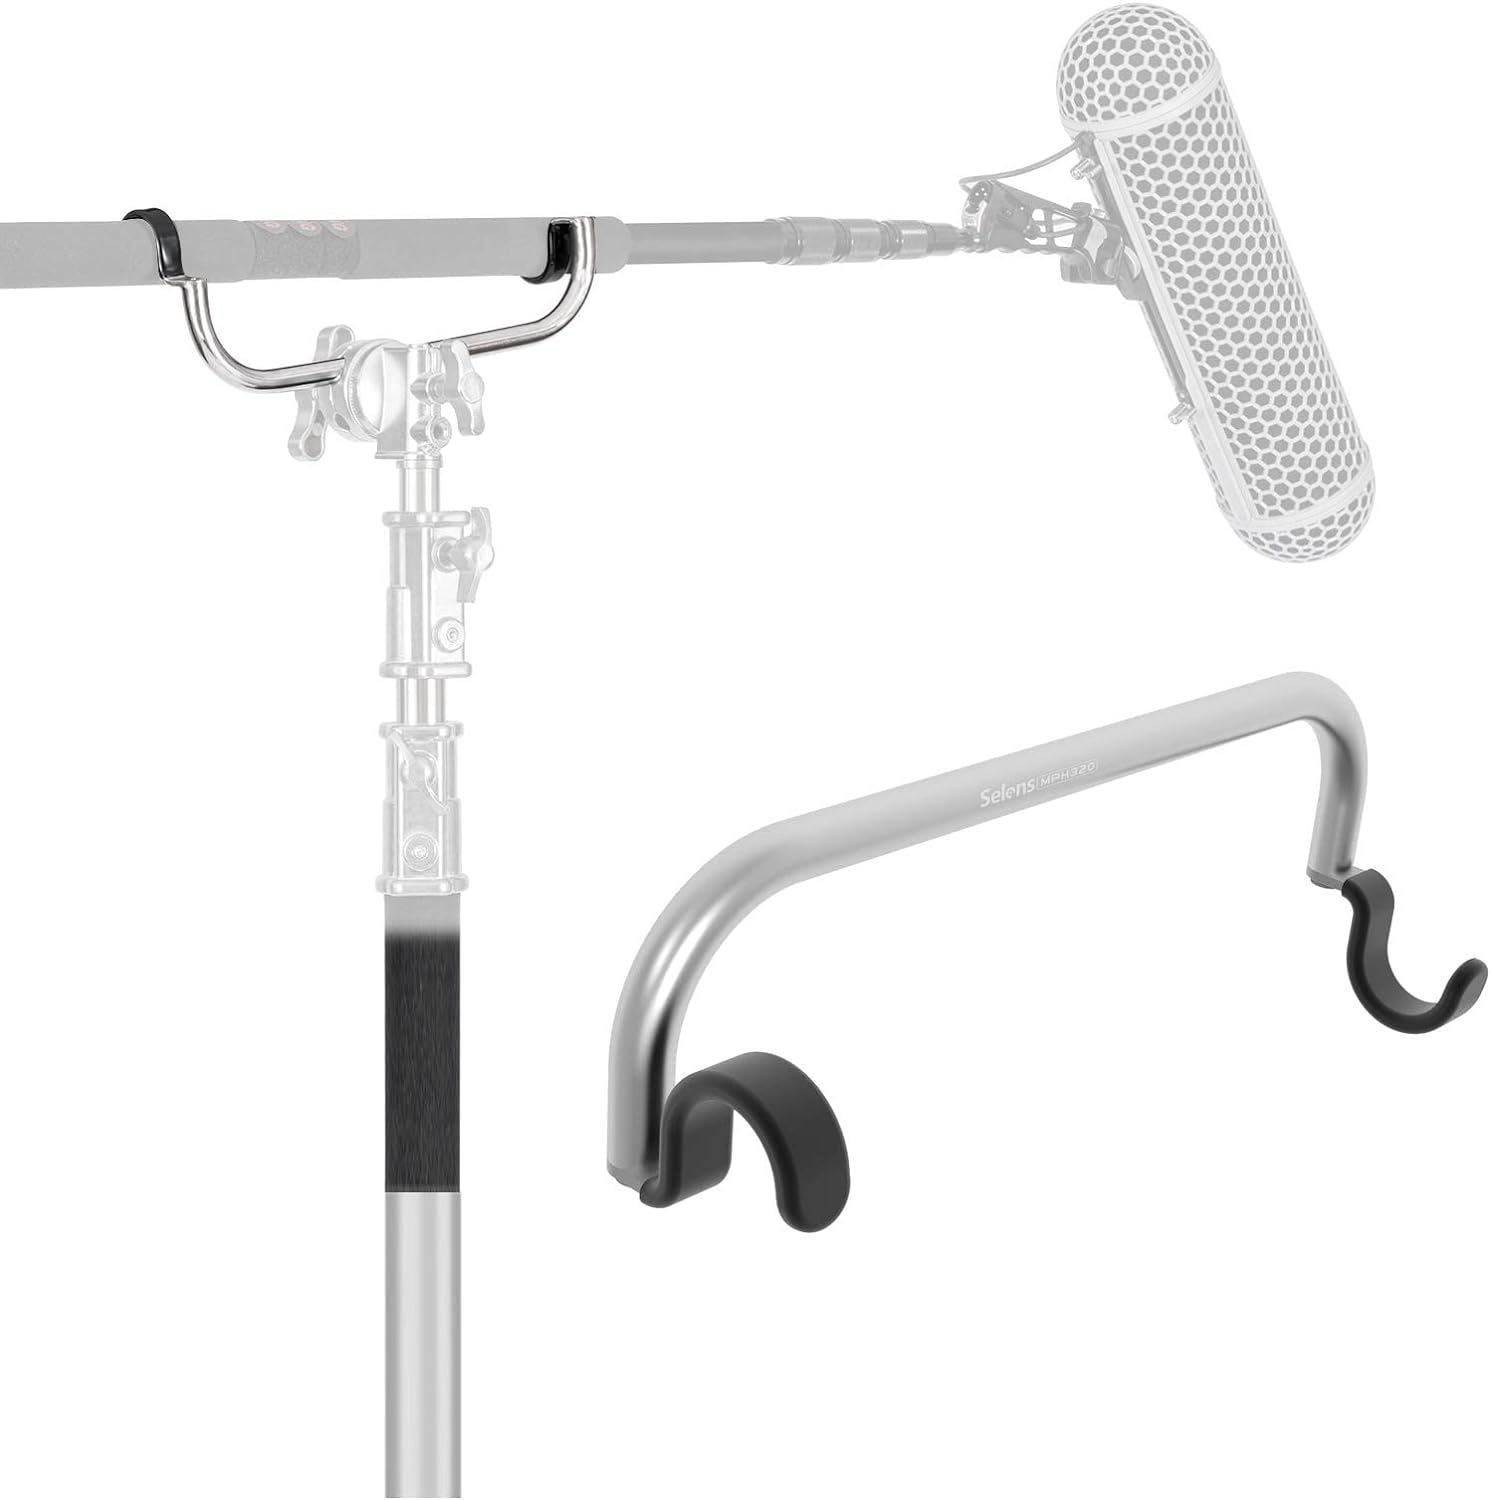 Selens Video and Audio Metal MPH320 Microphone Boom Holder Built-in Magnets for Music Recording, Interviewing